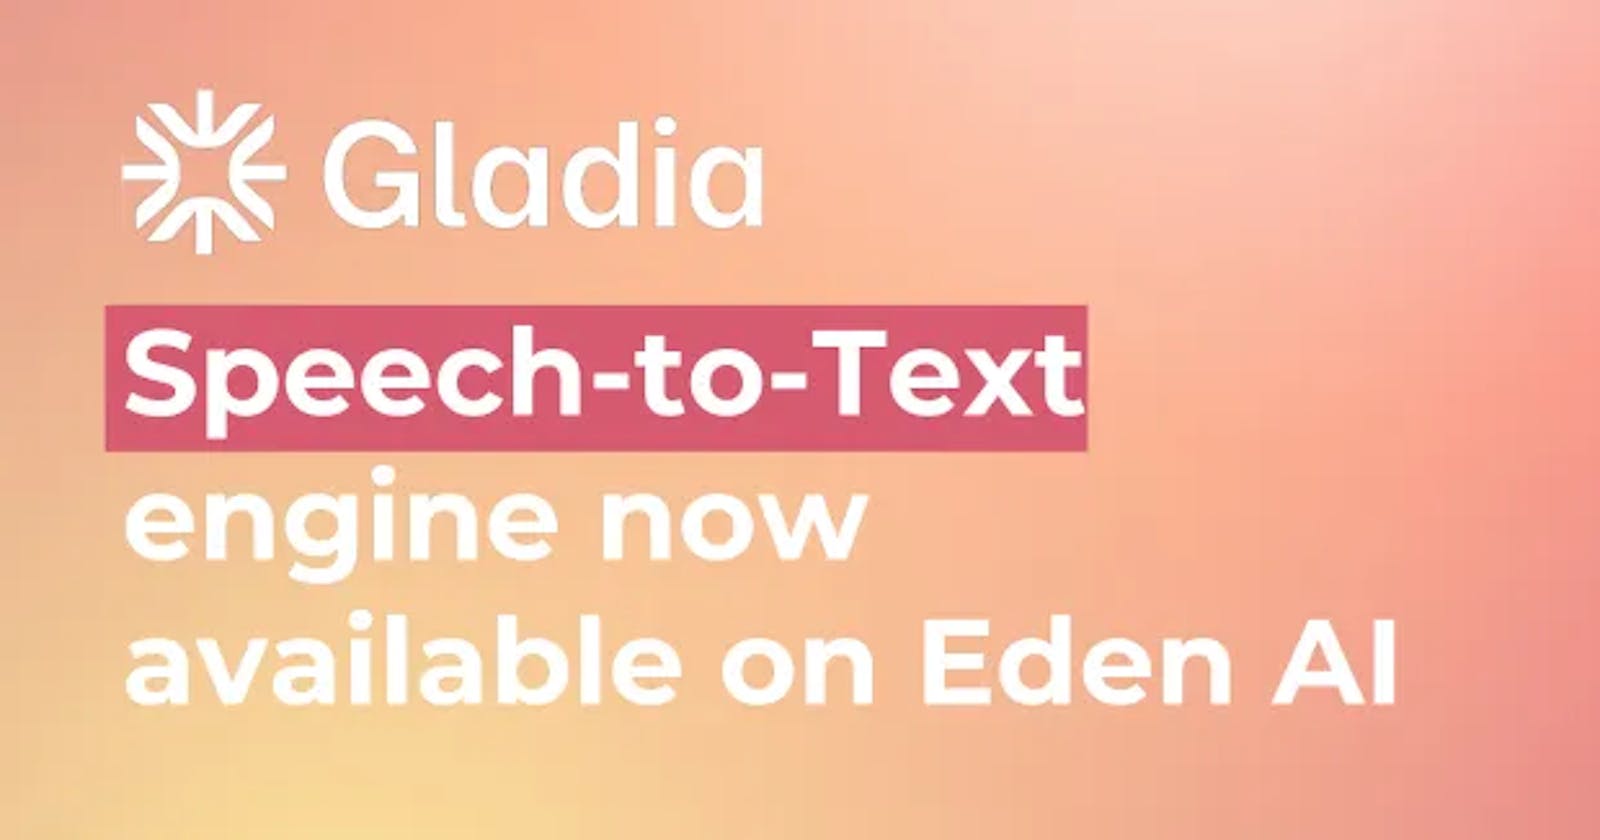 Gladia Speech-to-Text engine is available on Eden AI